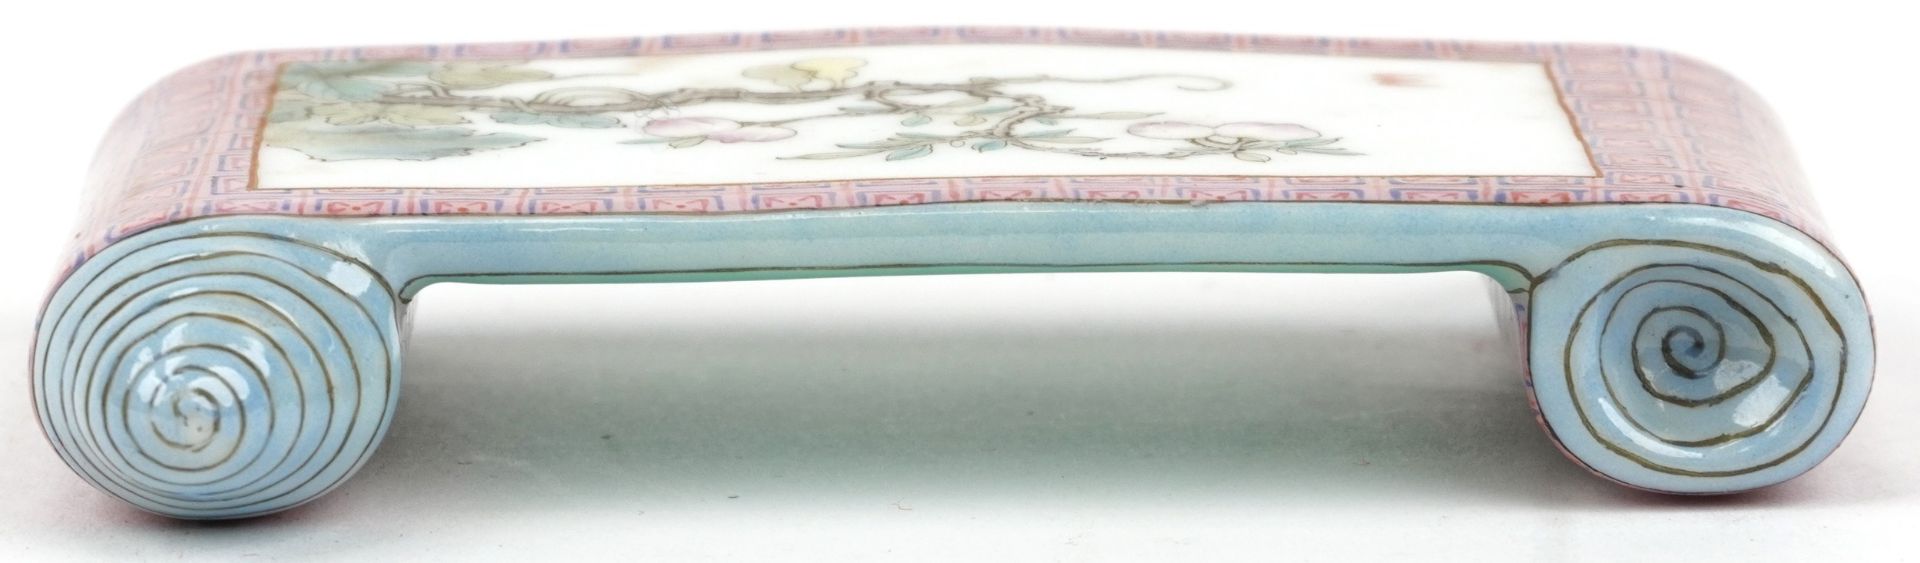 Chinese porcelain scholar's wrist rest in the form of a scroll hand painted in the famille rose - Image 5 of 9